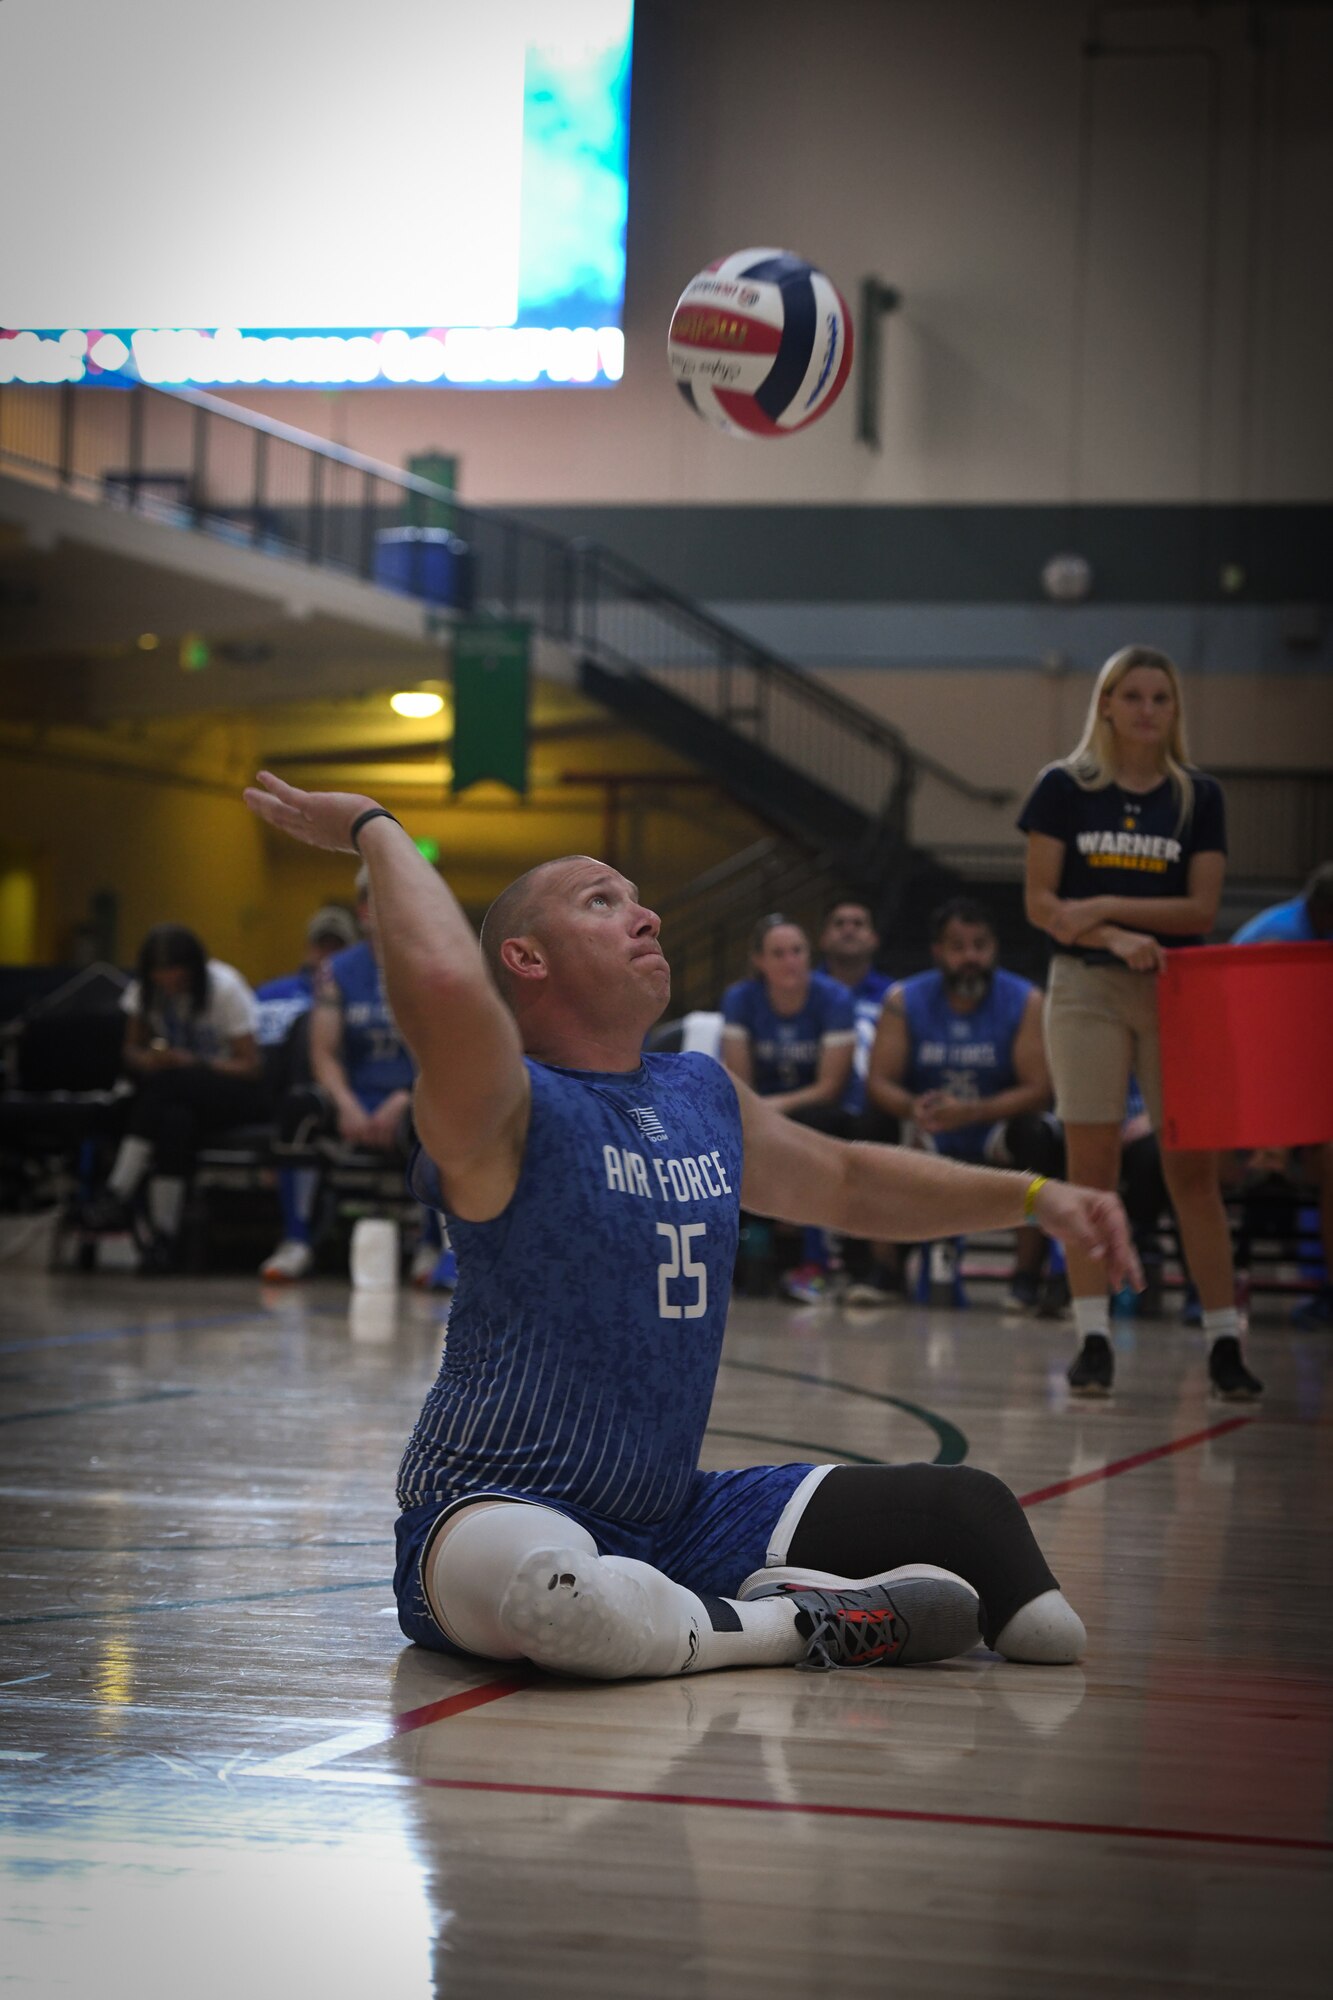 First Sgt. Benjamin Seekell, Team Air Force, competes in seating volleyball during the 2022 DoD Warrior Games, August 27, 2022.